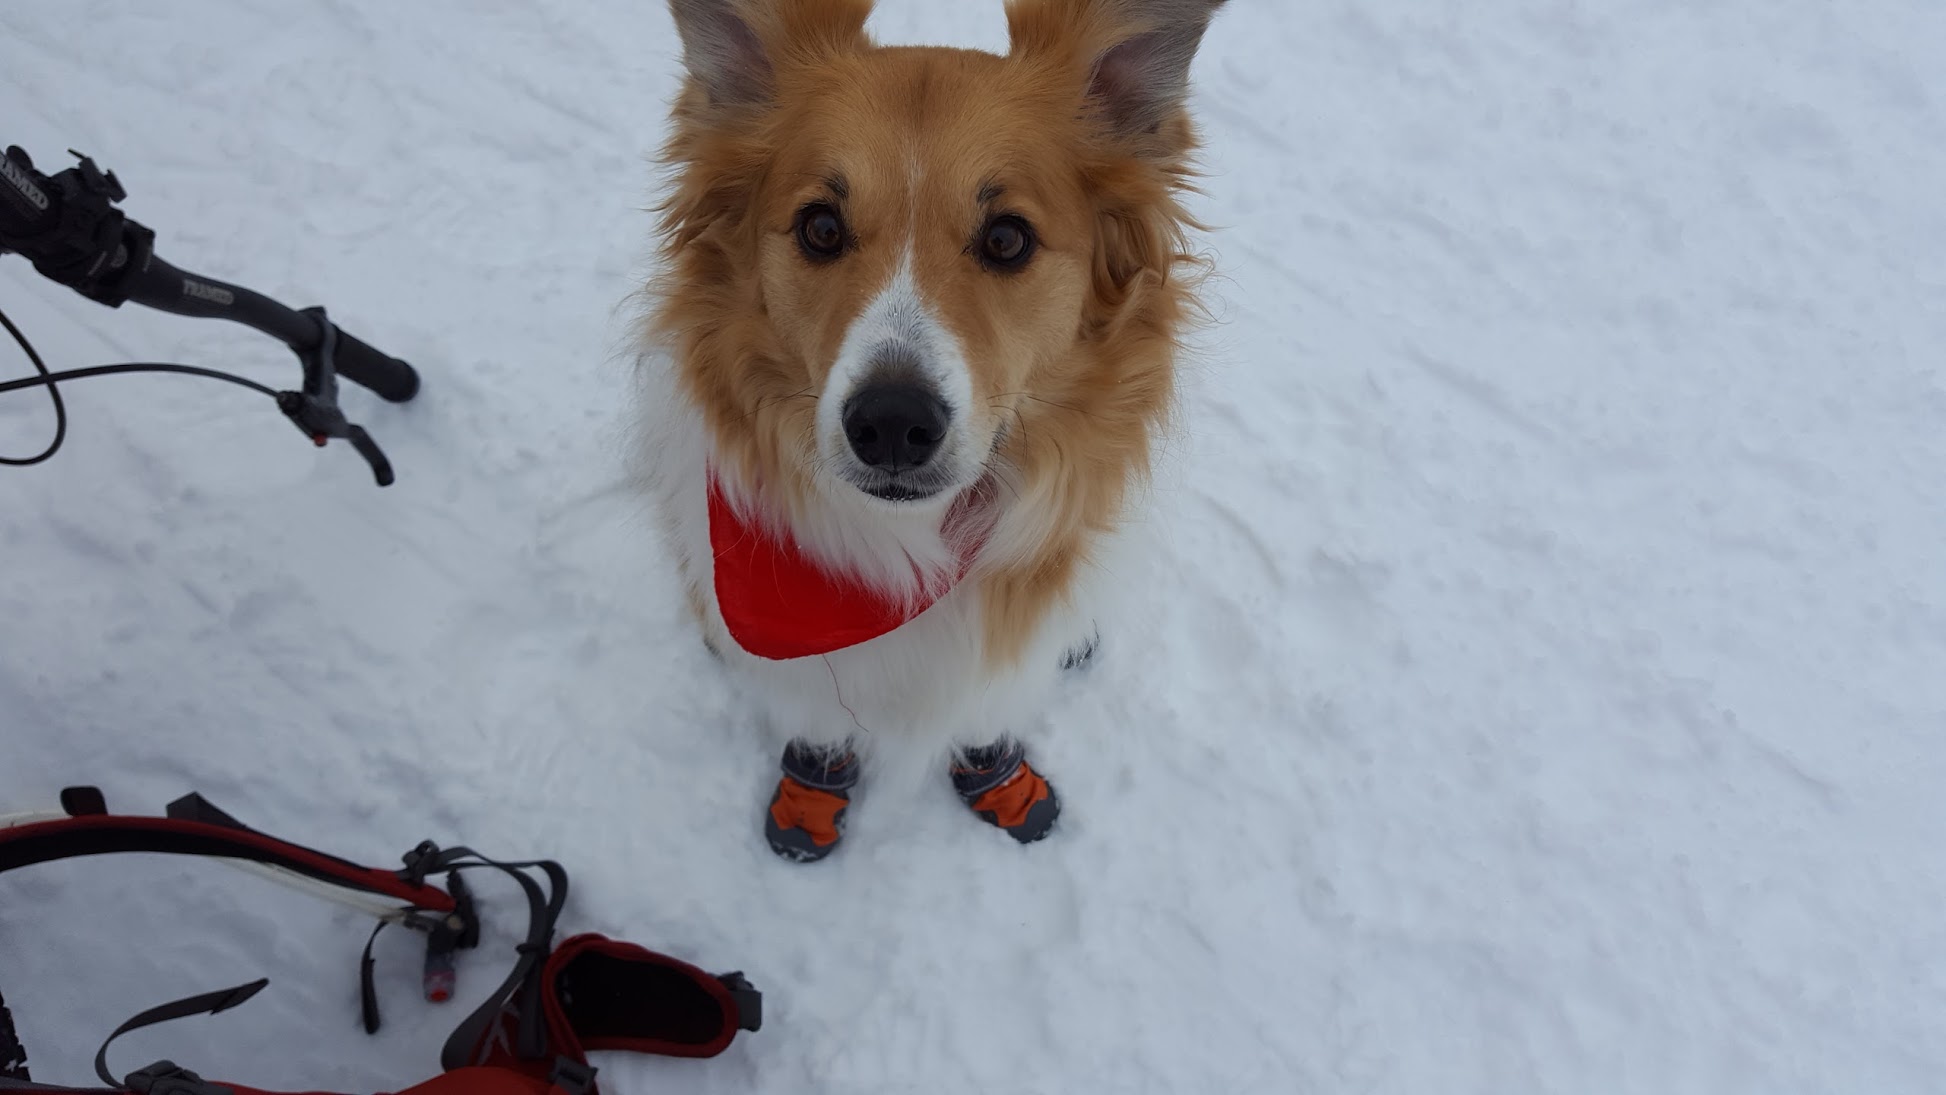 Dog wearing boots in the snow